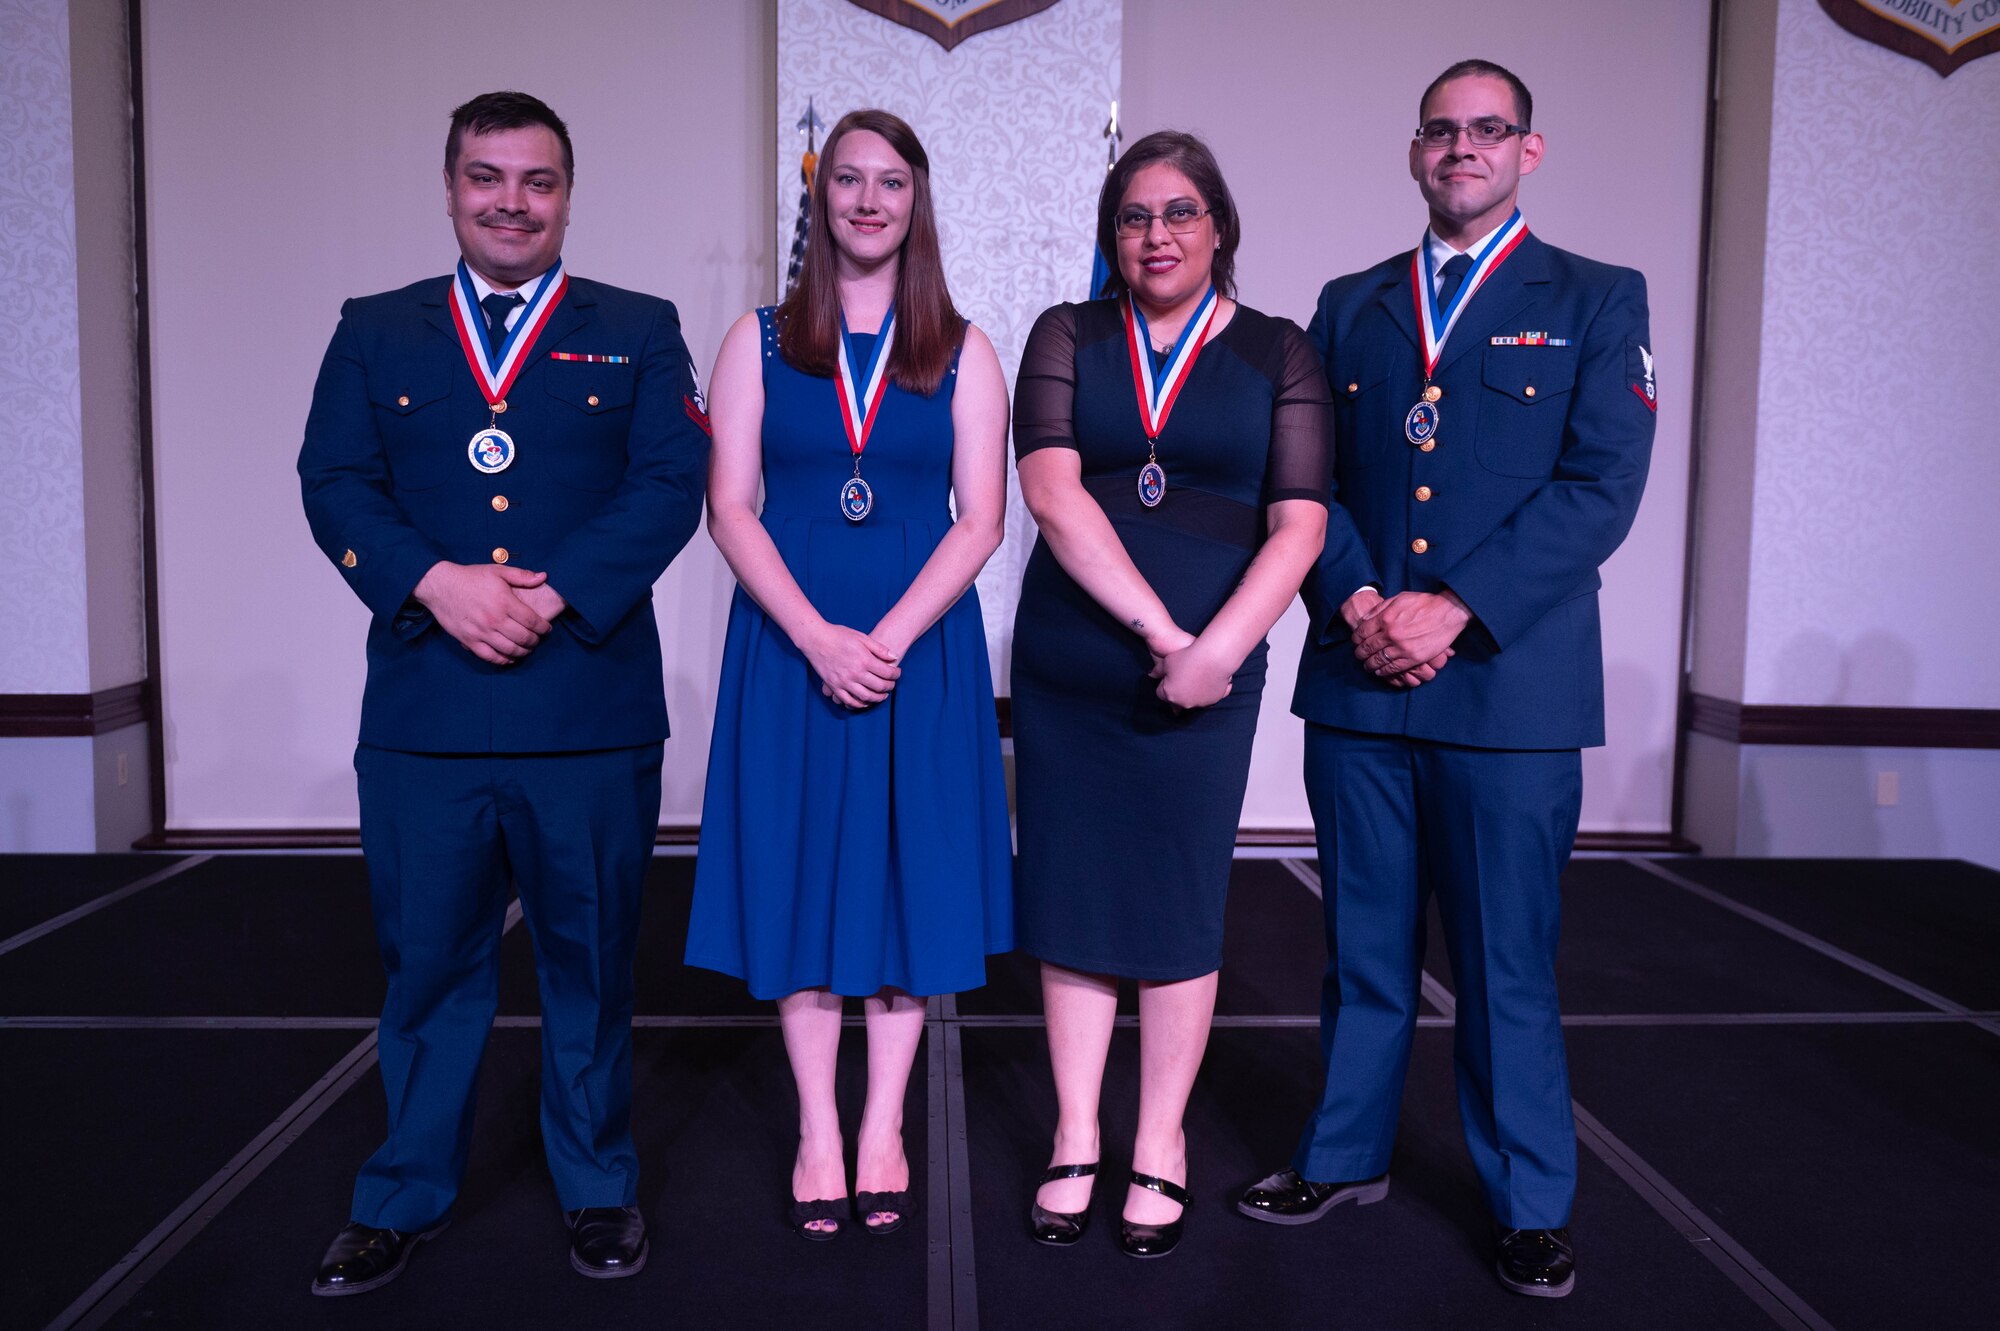 Two Coast Guardsmen and two civilians graduated Airman Leadership School at Scott Air Force Base, Illinois, May 18, 2023. Those attending ALS are prepared for positions of greater responsibility by strengthening their ability to lead, follow, and manage while also gaining a broader understanding of the military profession and their role within. (U.S. Air Force photo by Airman 1st Class Madeline Baisey)